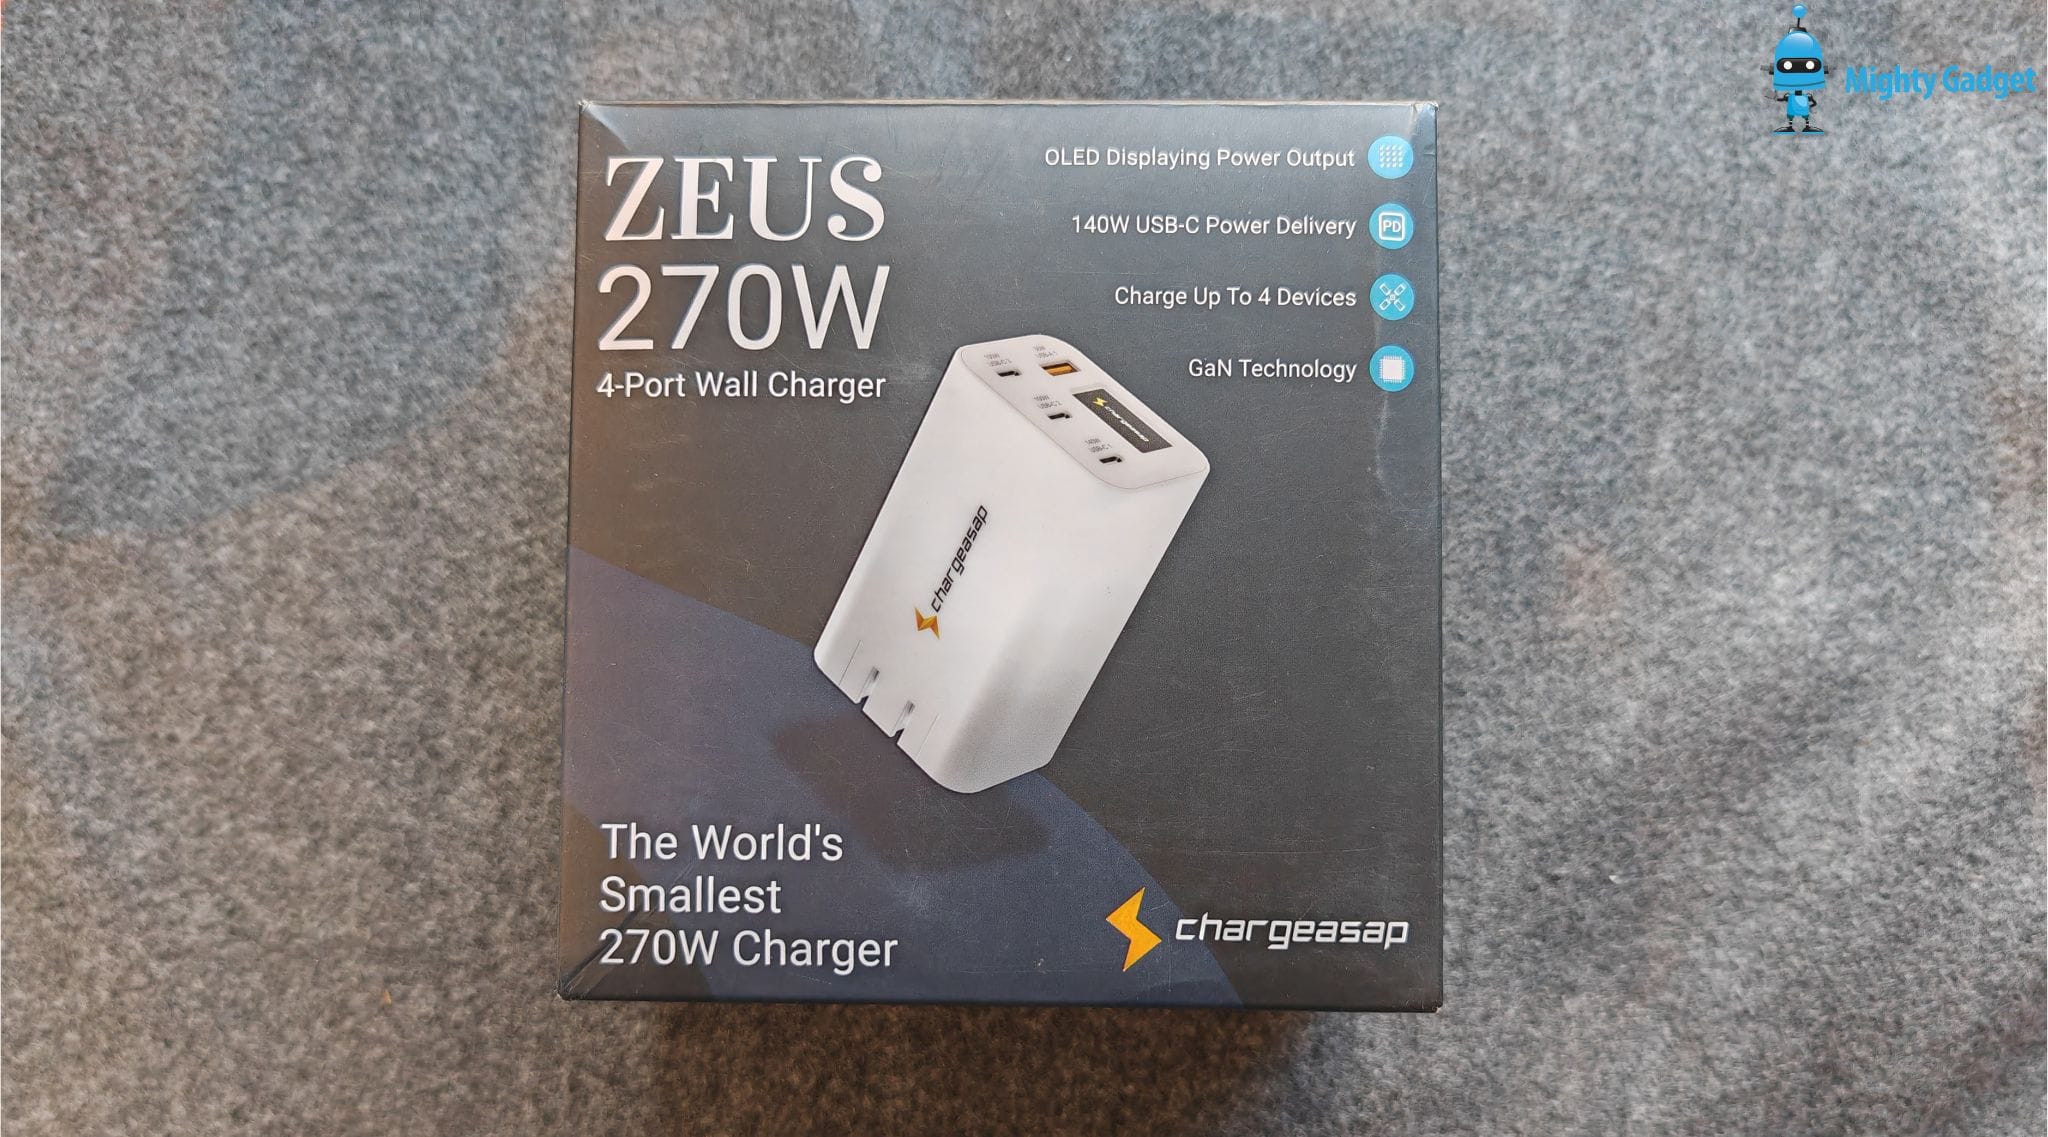 Chargeasap Zeus 270W GaN Charger Review by MightyGadget